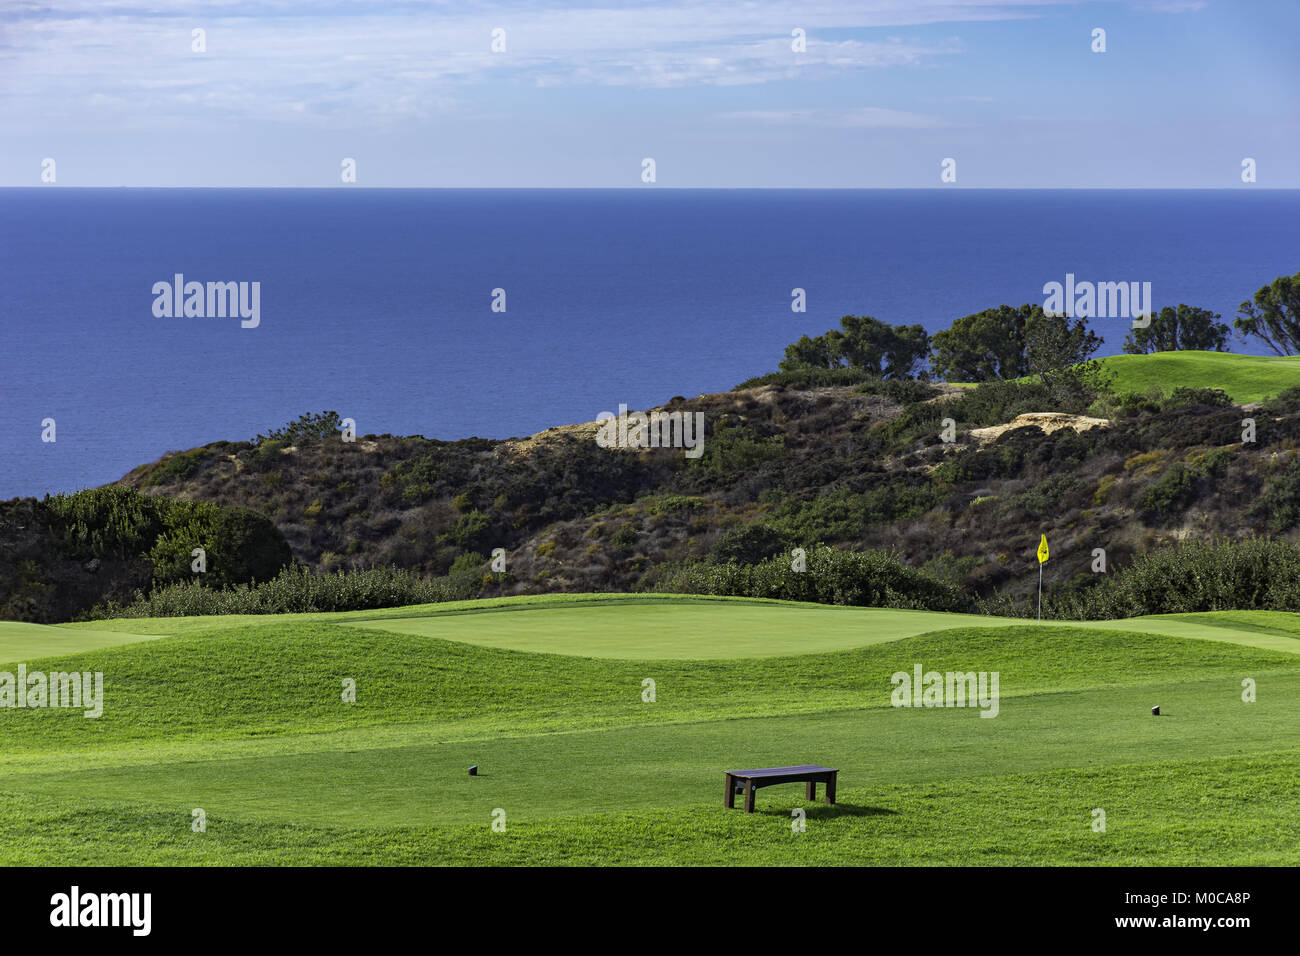 Golf Course at Torrey Pines with Pacific Ocean in the background La Jolla California USA near San Diego Stock Photo